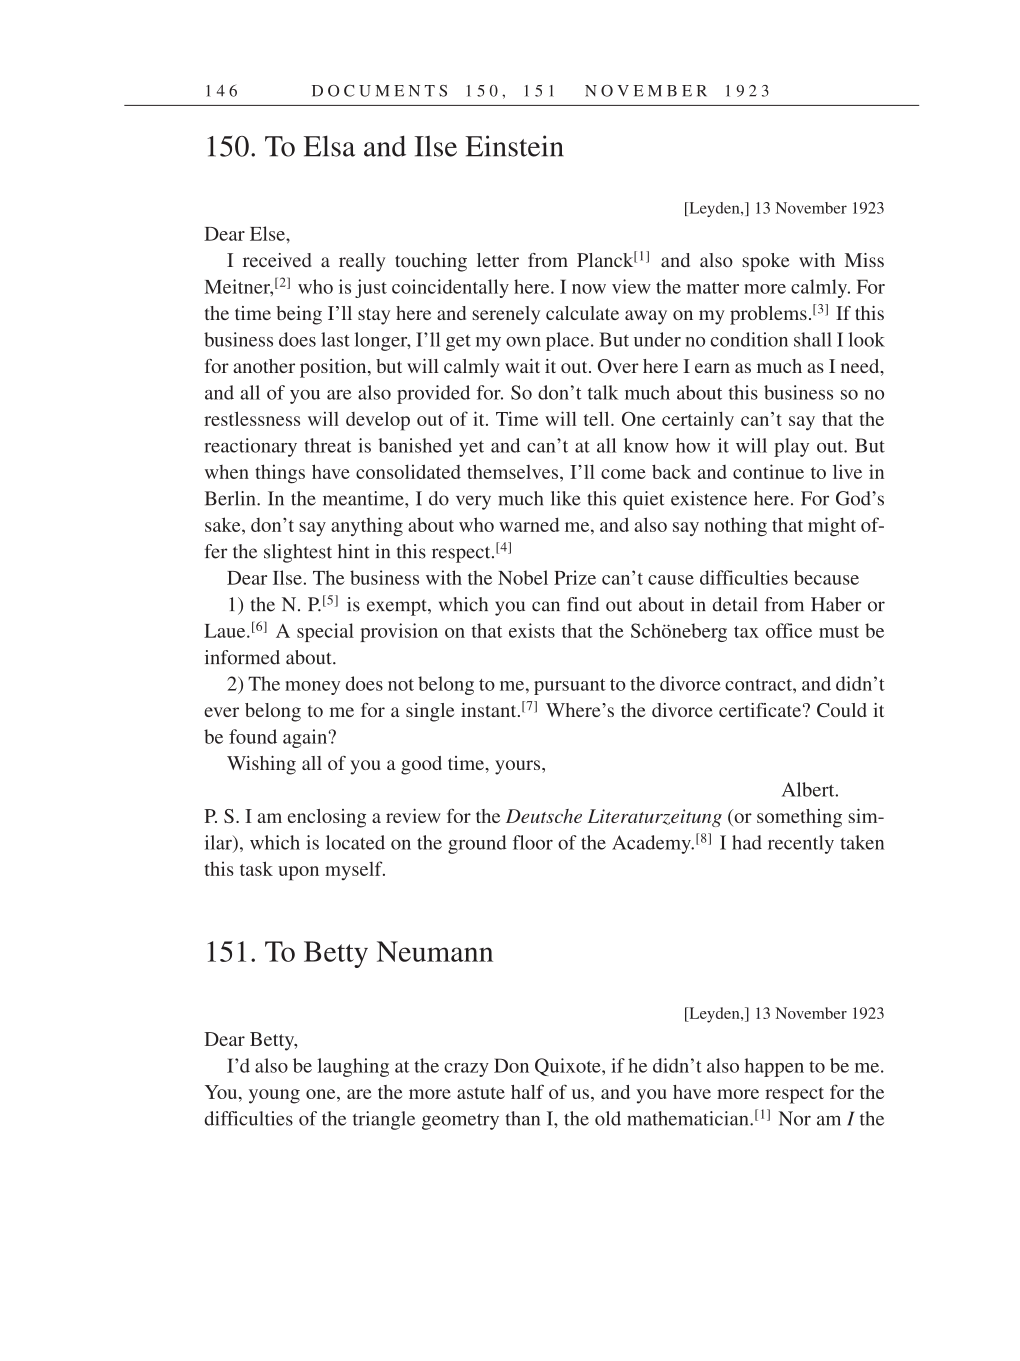 Volume 14: The Berlin Years: Writings & Correspondence, April 1923-May 1925 (English Translation Supplement) page 146